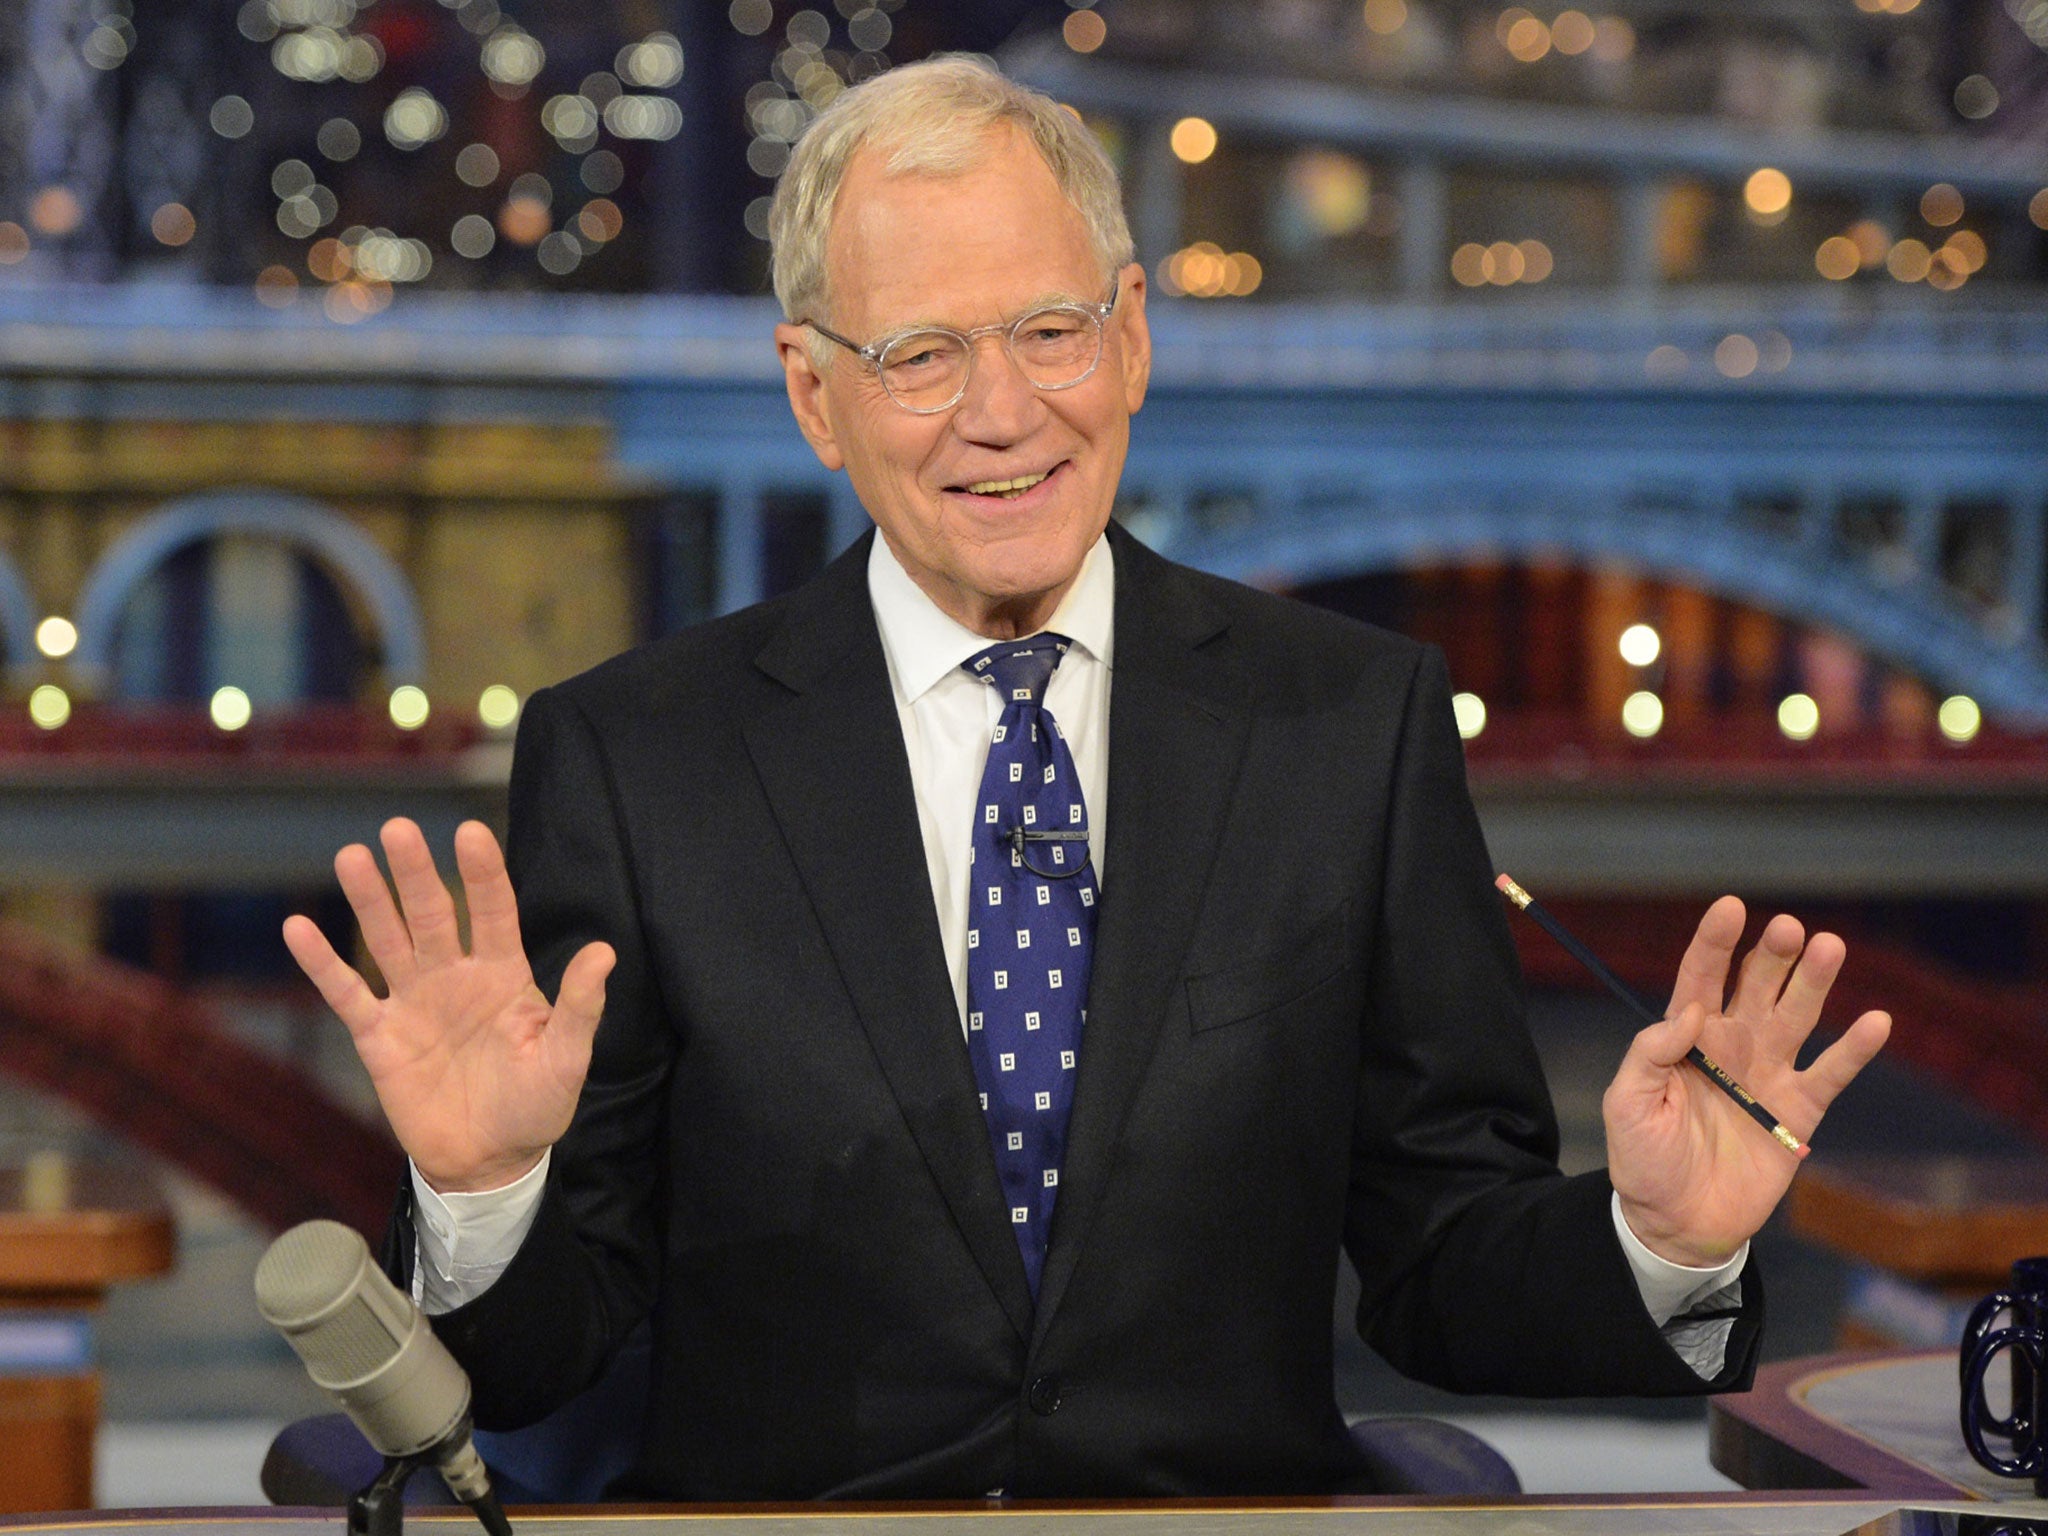 David Letterman comes out of retirement to mock Donald Trump over his